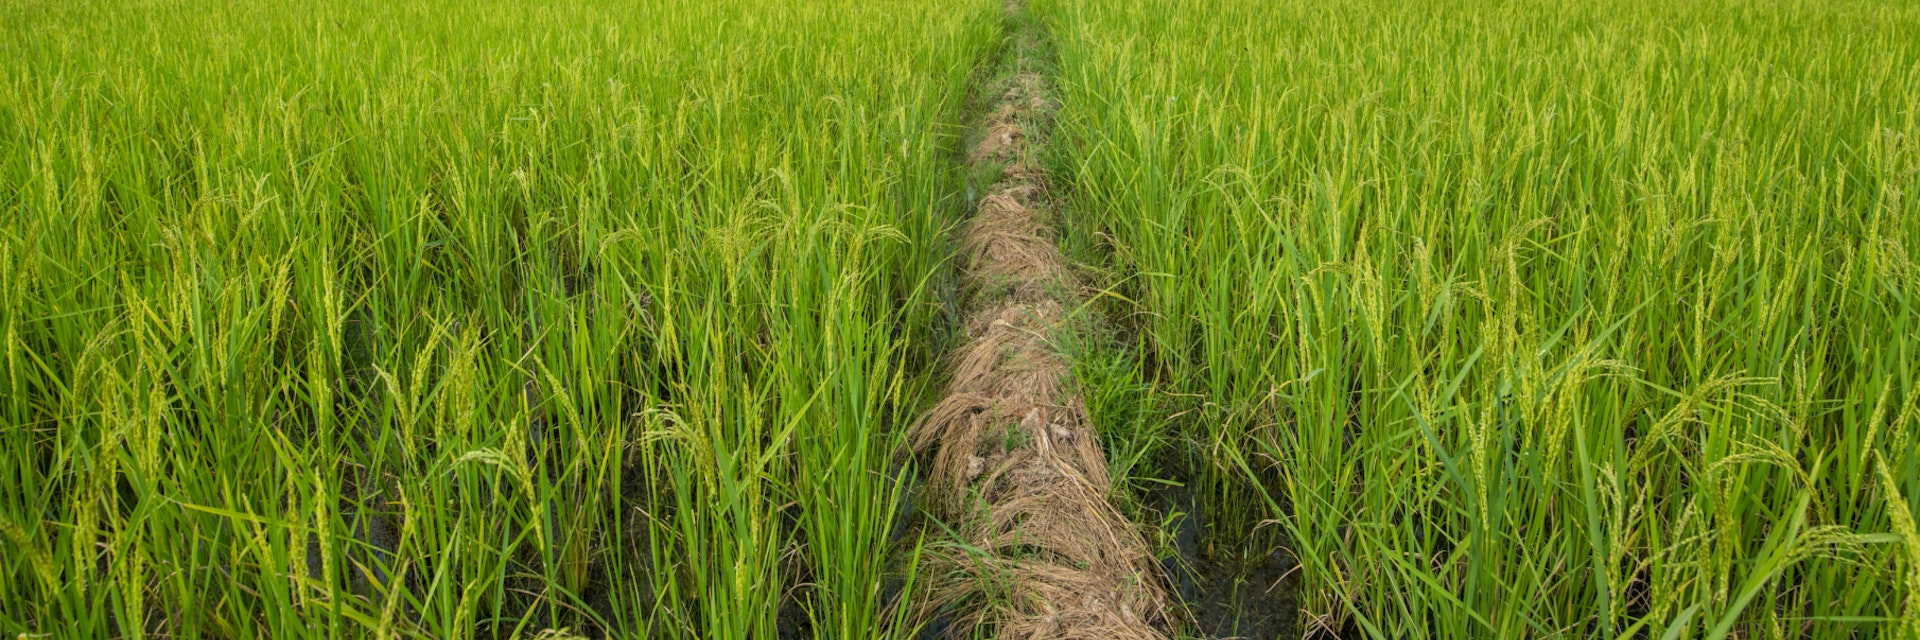 A foot path cuts through an African rice (Oryza glaberrima) field, Gbedin village, Nimba County, Liberia. (Photo by: Edwin Remsberg/VWPics/Universal Images Group via Getty Images)